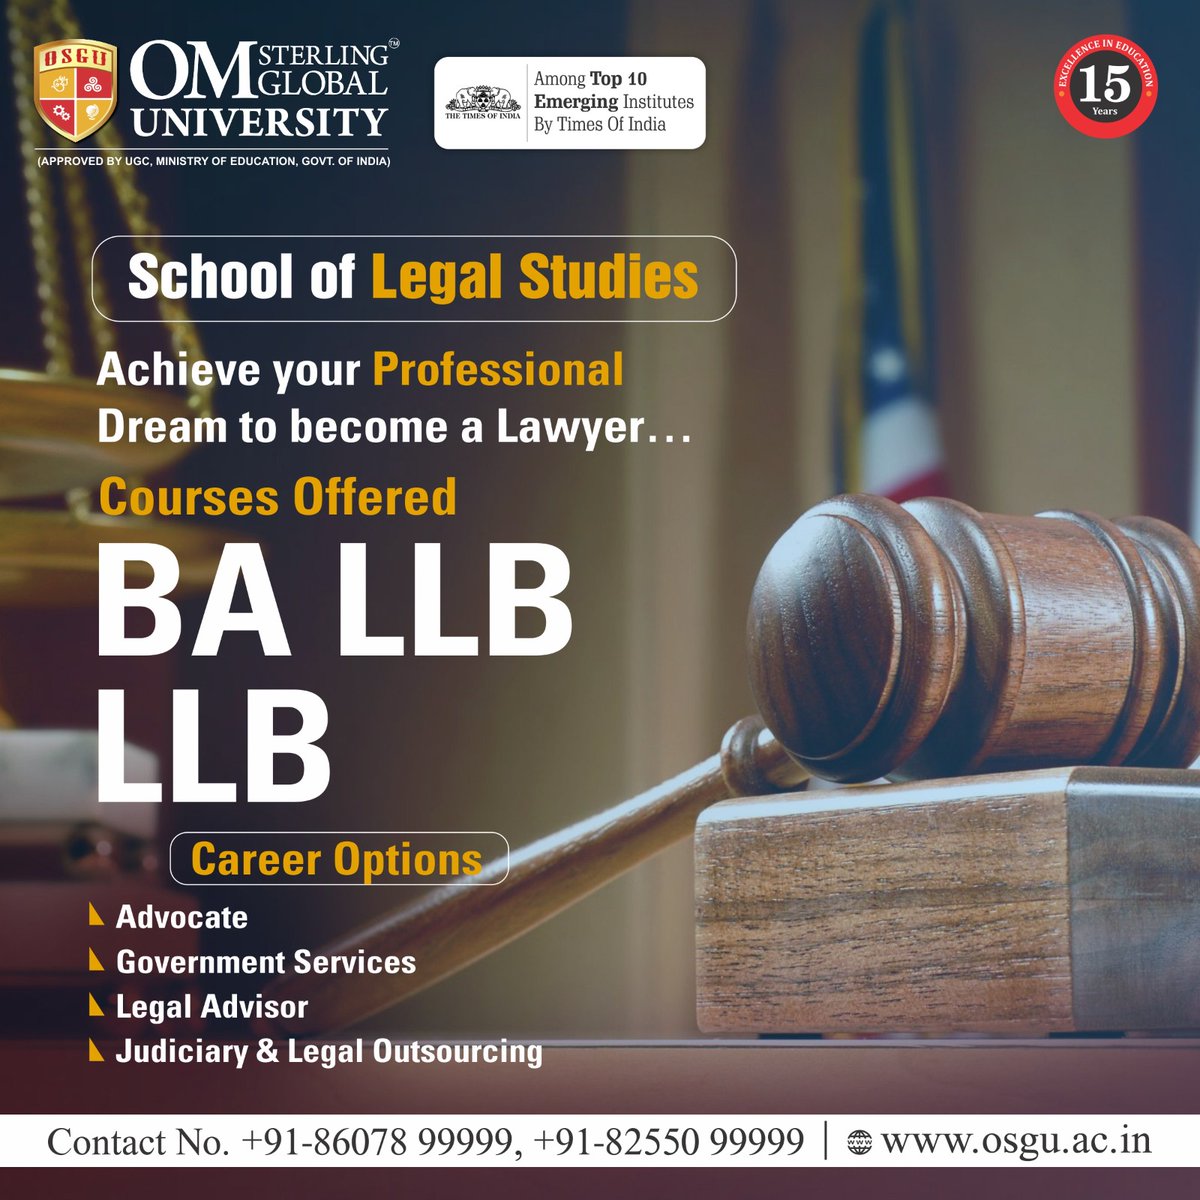 Join #Law_Courses at #OSGU and kick-start your career as a corporate lawyer.
Register at admission.osgu.ac.in
We are reachable at 082550 99999, 8607899999

#OSGU #knowledge #bestuniversity #professionalcourses #osguhisar #legalstudies #studyatosgu #BALLB #LLM #law #futuregoals